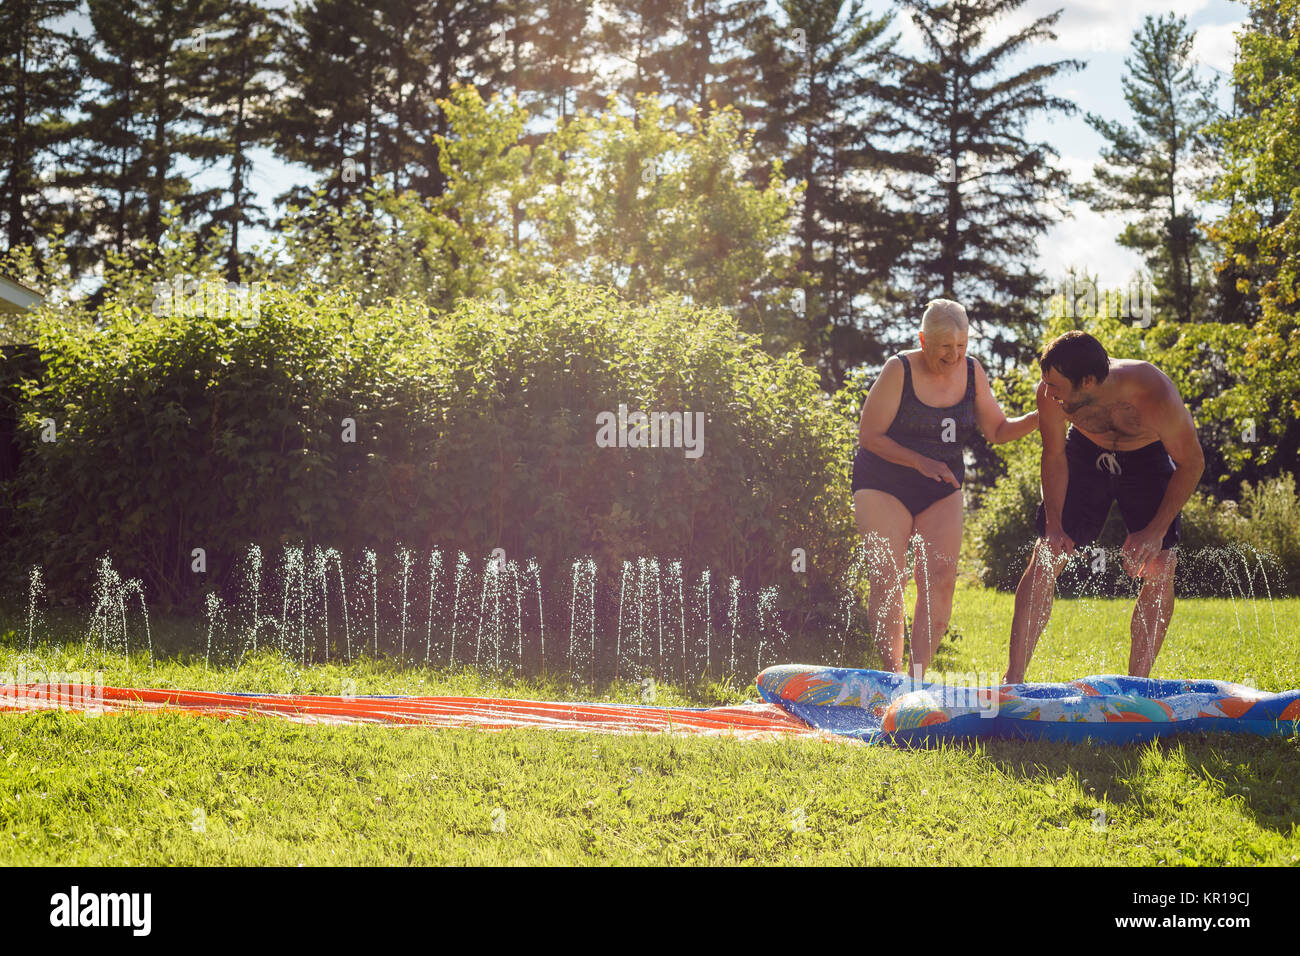 Man and his mother playing on a slip and slide in the garden Stock Photo